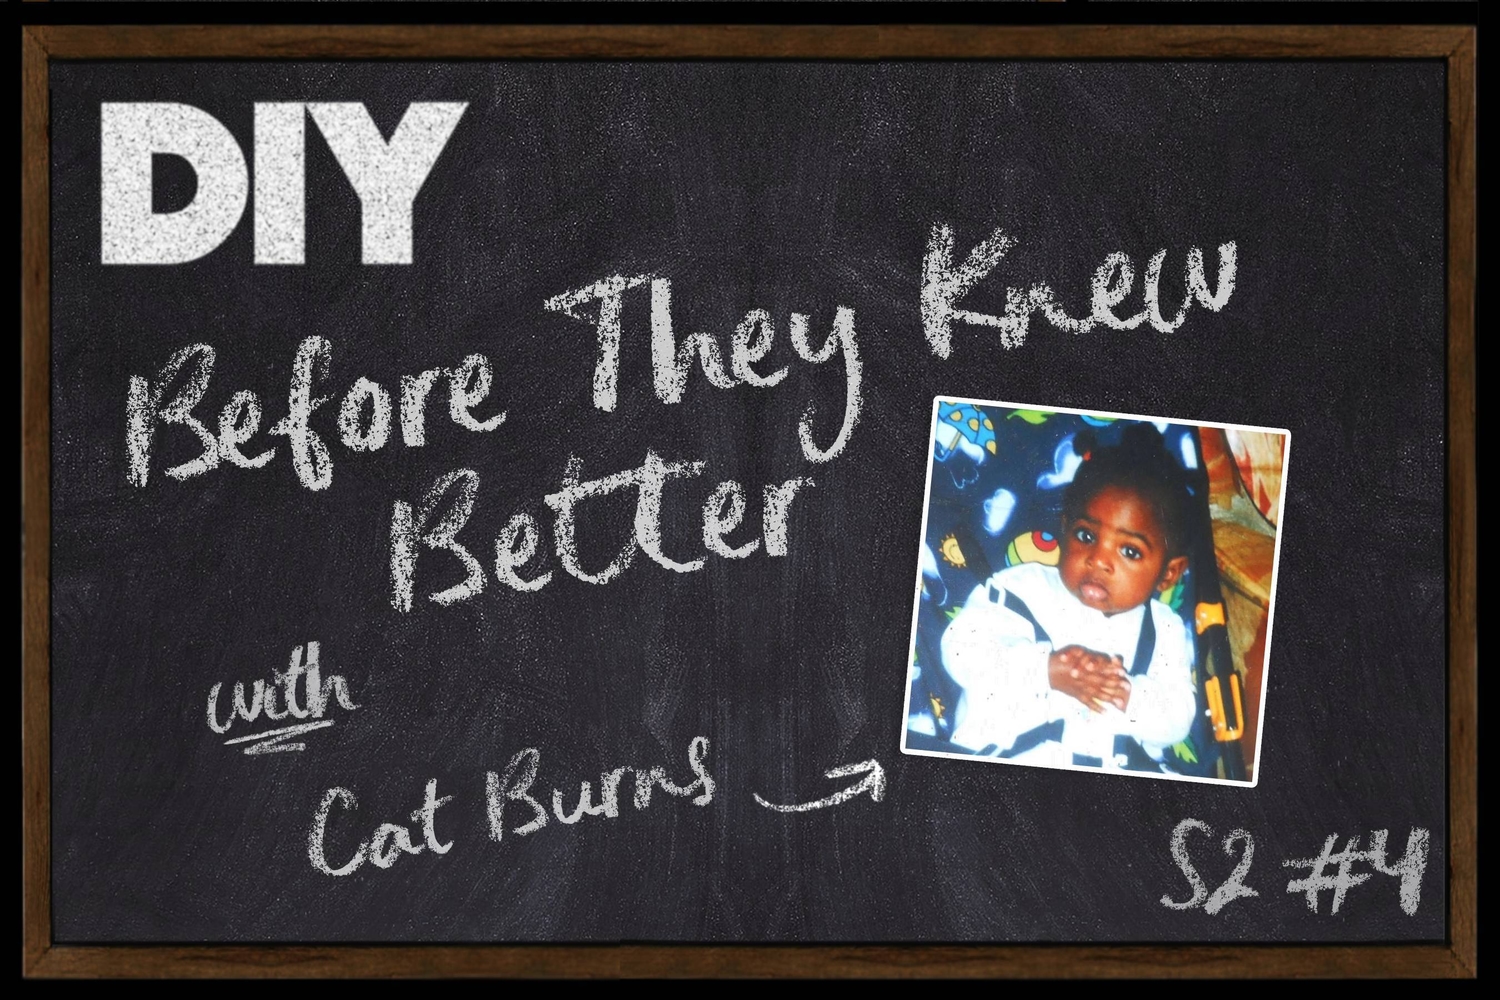 Cat Burns chats Ed Sheeran, sisterhood, and neurodiversity on latest episode of Before They Knew Better